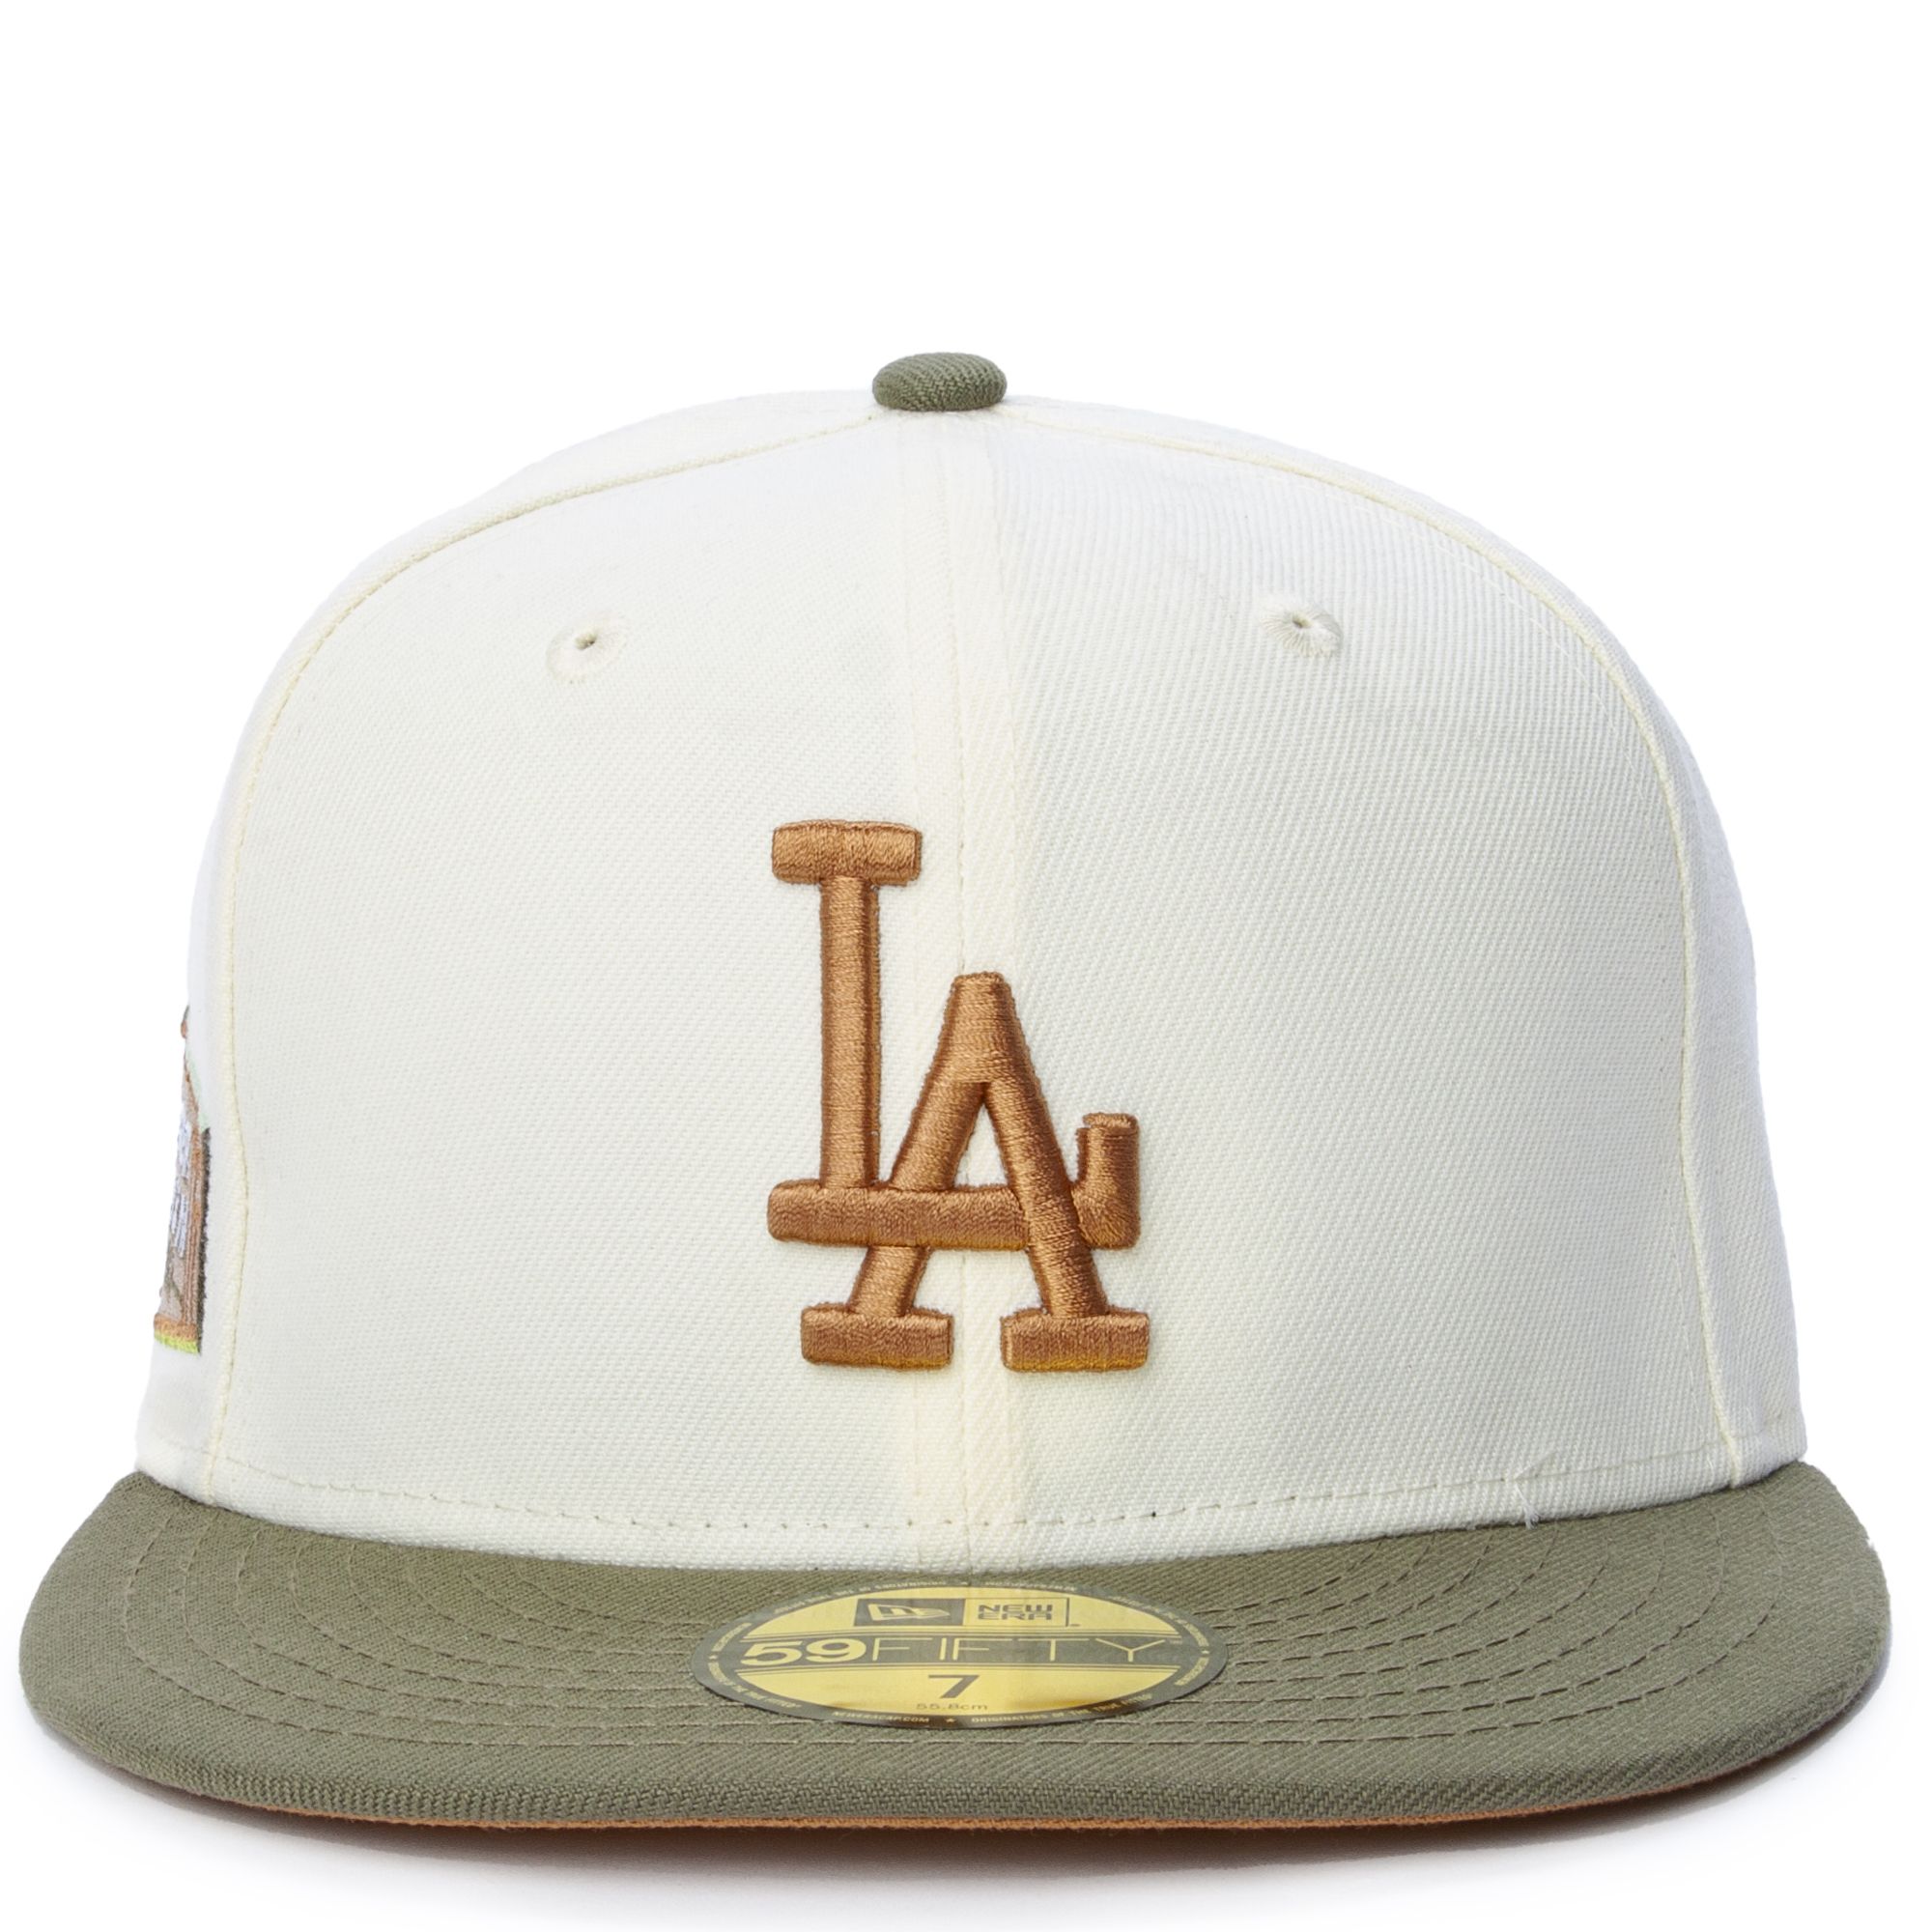 NEW ERA CAPS Los Angeles Dodgers New Era Dodger Stadium 59FIFTY Fitted ...